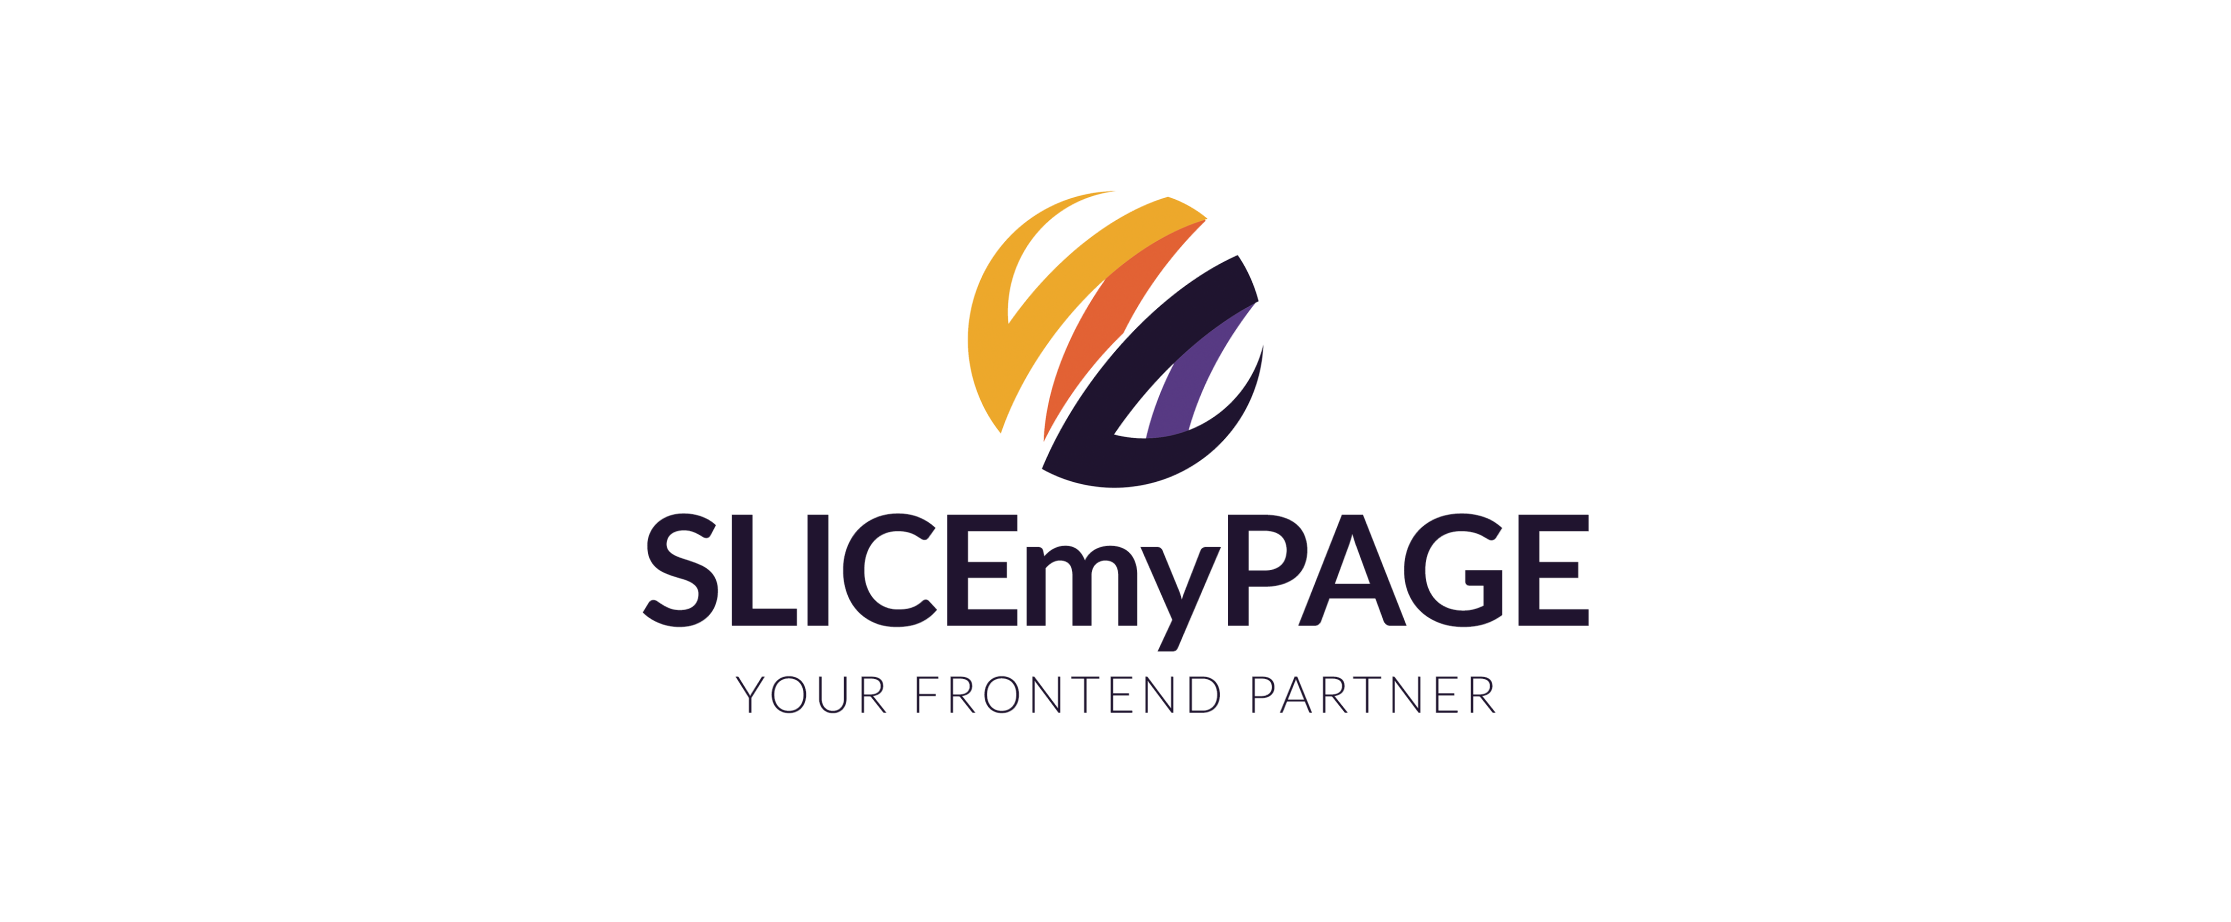 SLICEmyPAGE - Your Frontend Partner